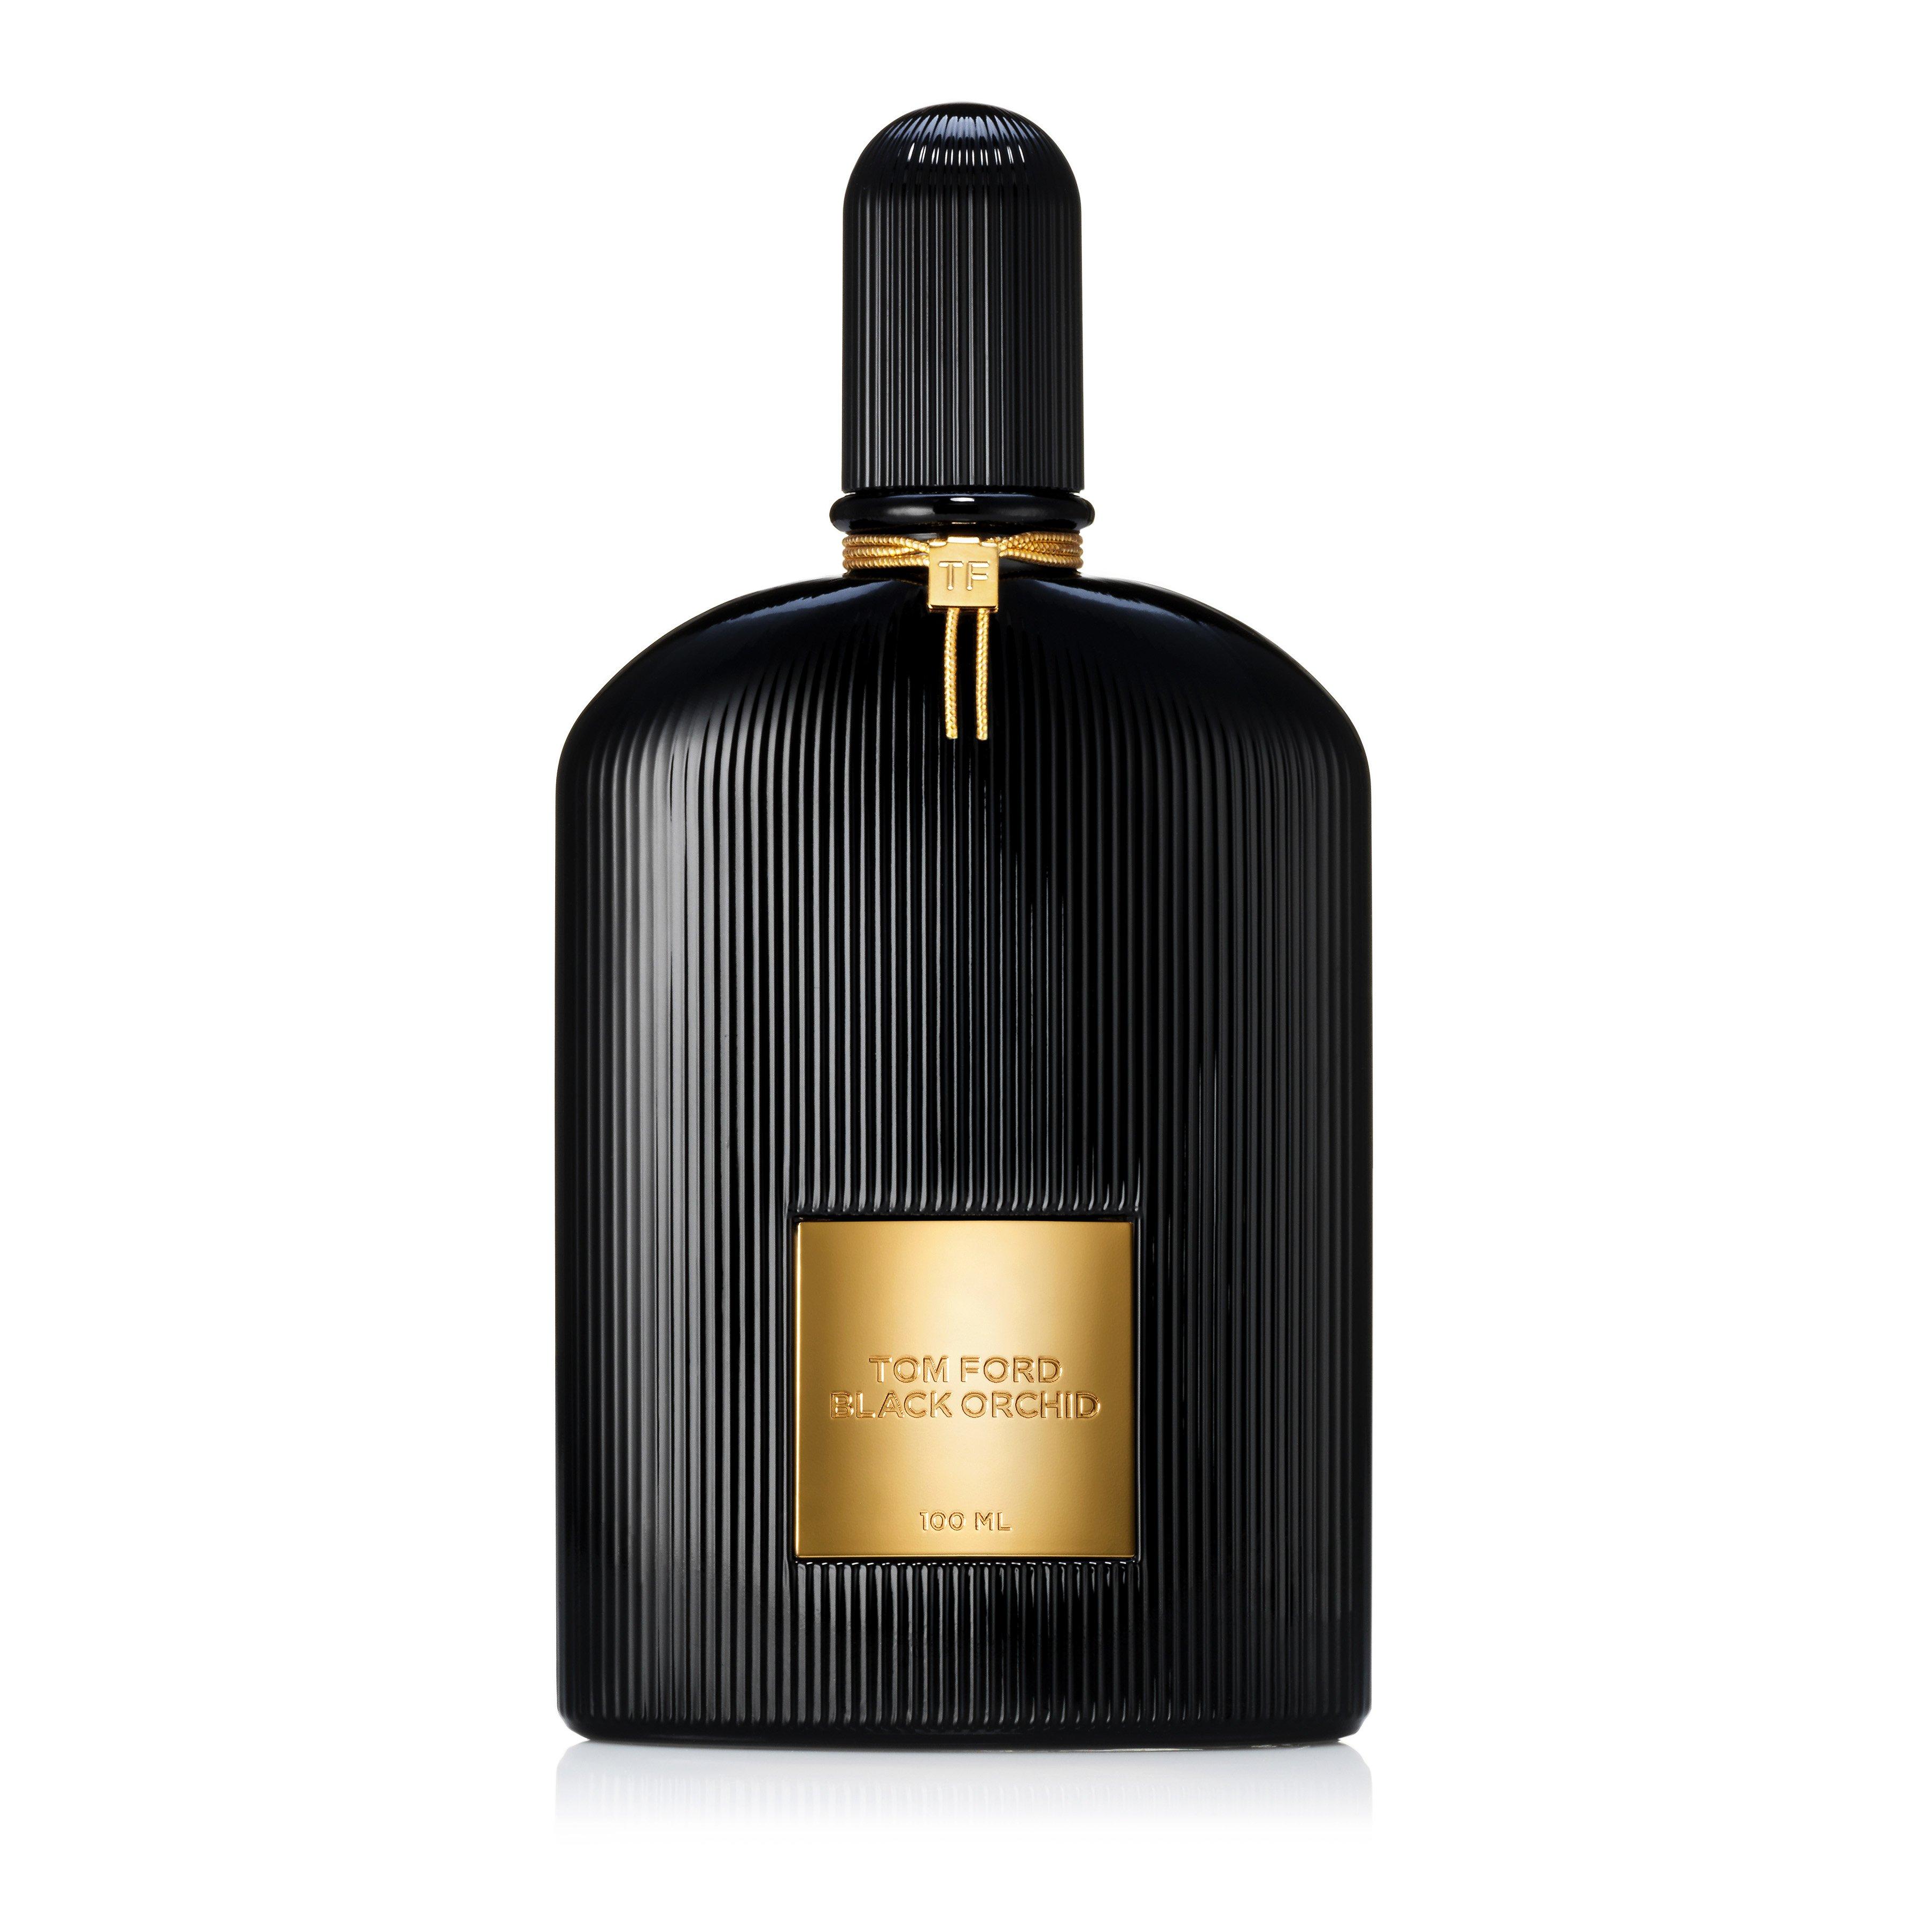 Tom ford black orchid ml tester